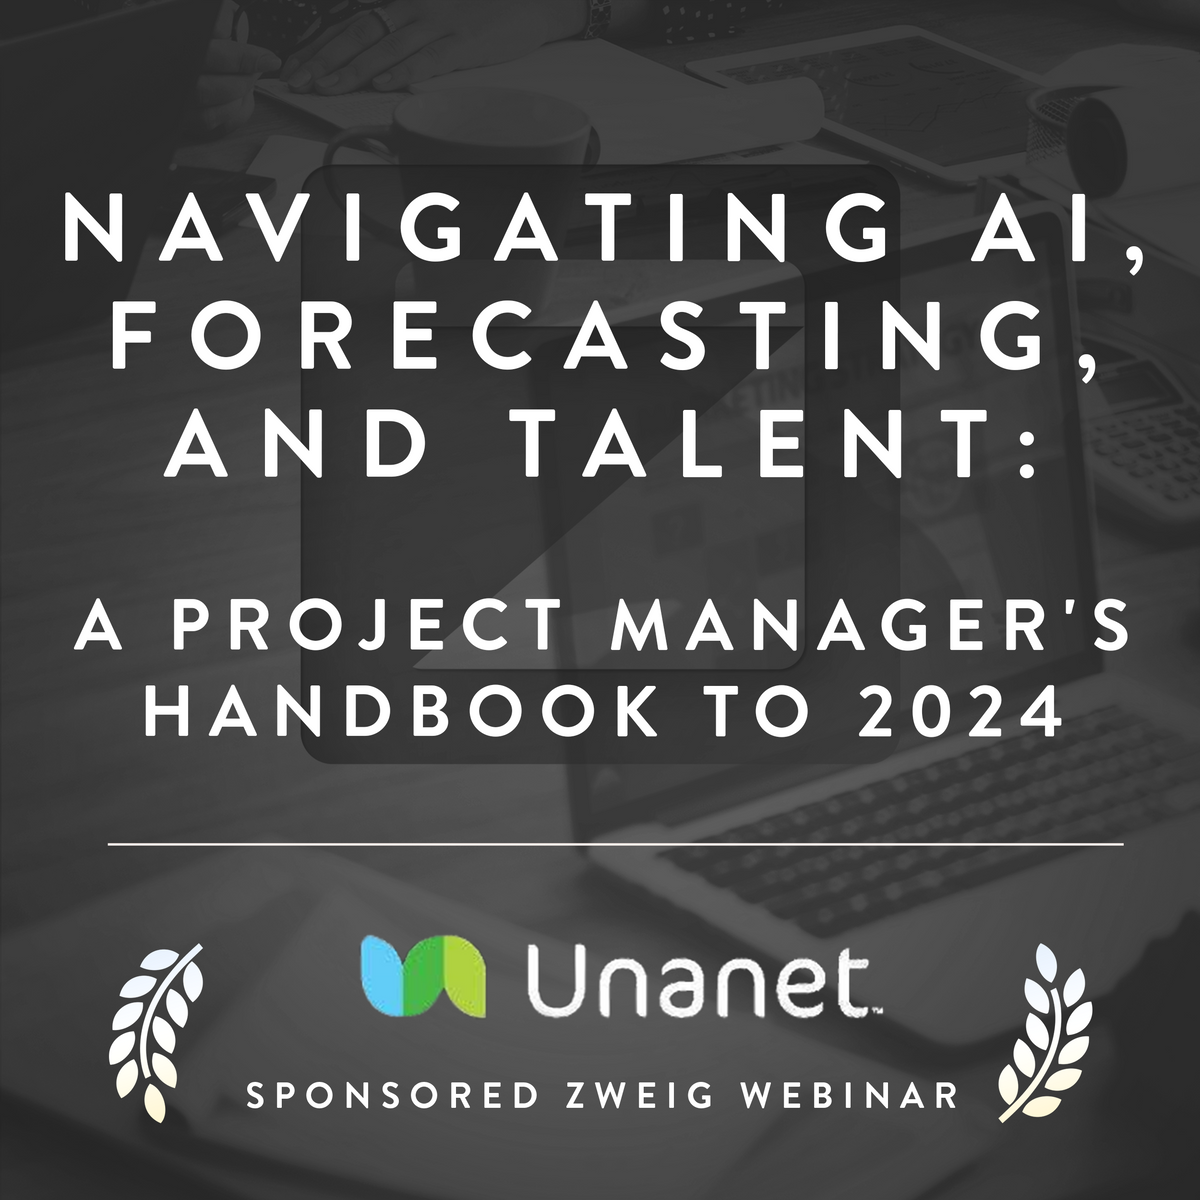 Navigating AI, Forecasting, and Talent: A Project Manager's Handbook to 2024 - A Unanet Sponsored Webinar Cover